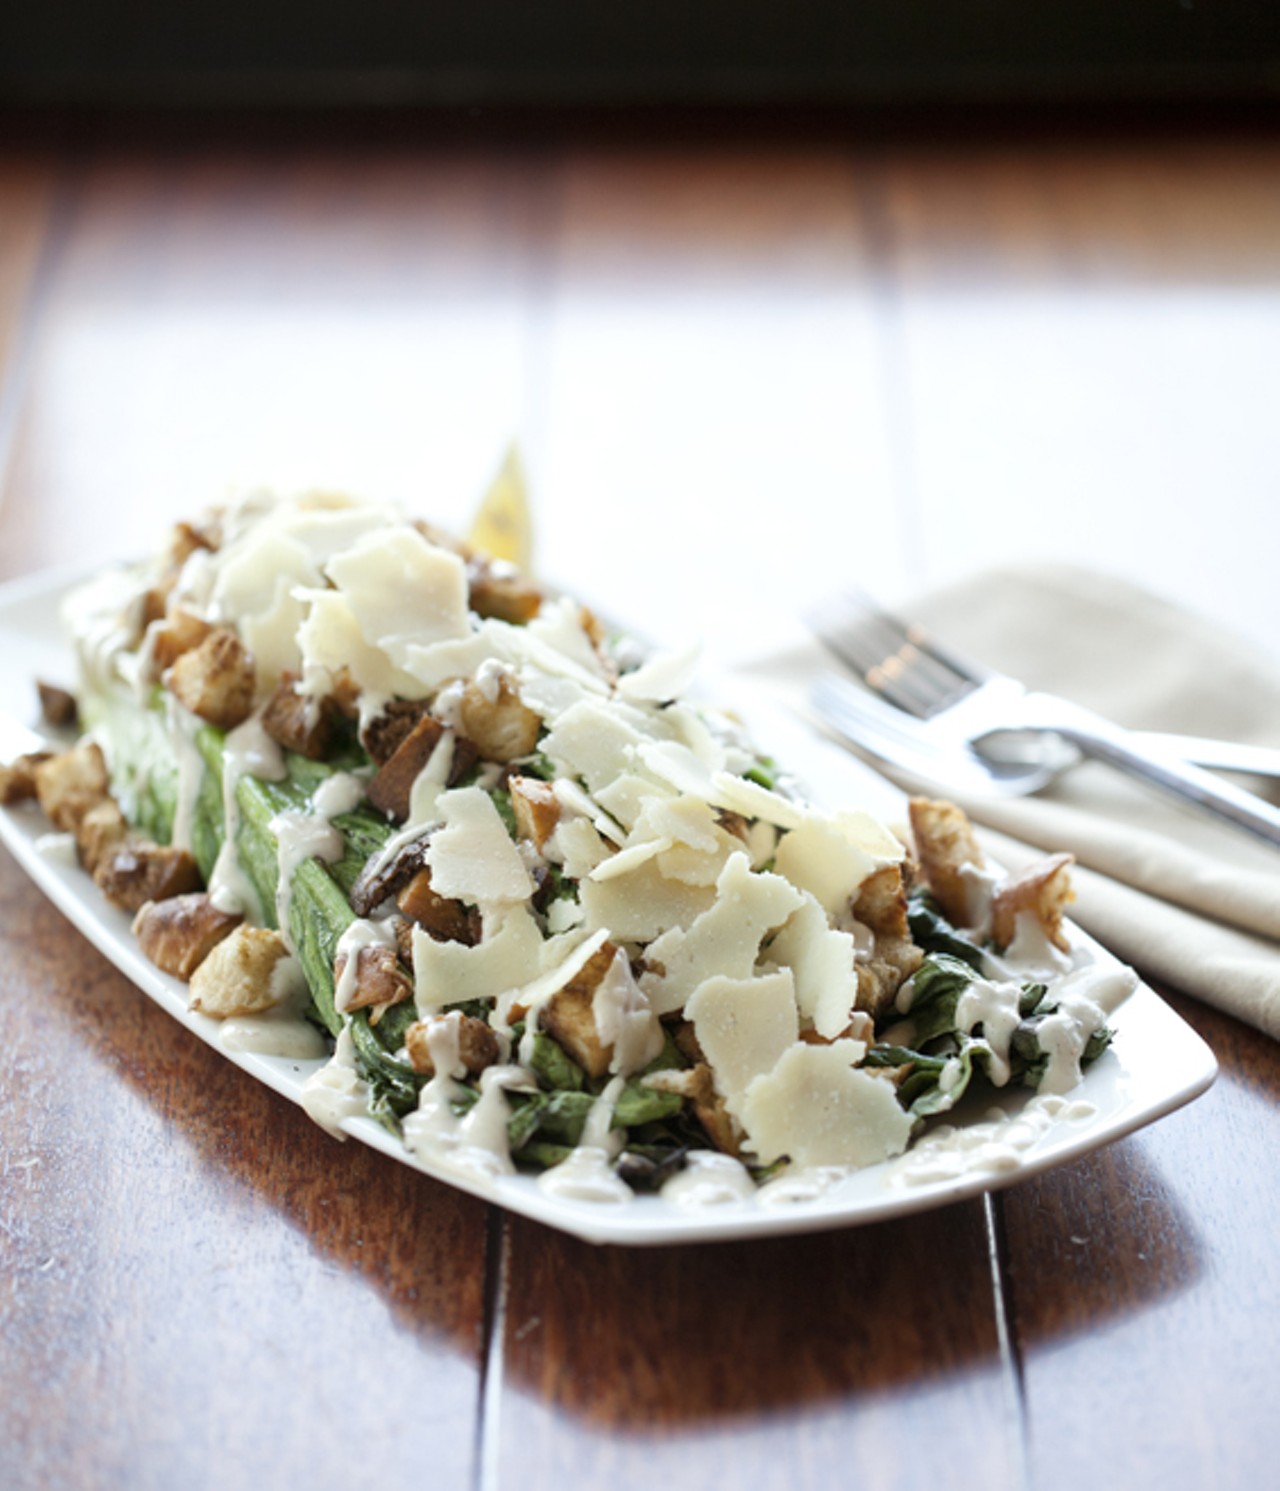 Grilled Caesar Wedge with lemon, fresh cracked pepper, shaved parmesan, garlic roasted croutons and house-made dressing.